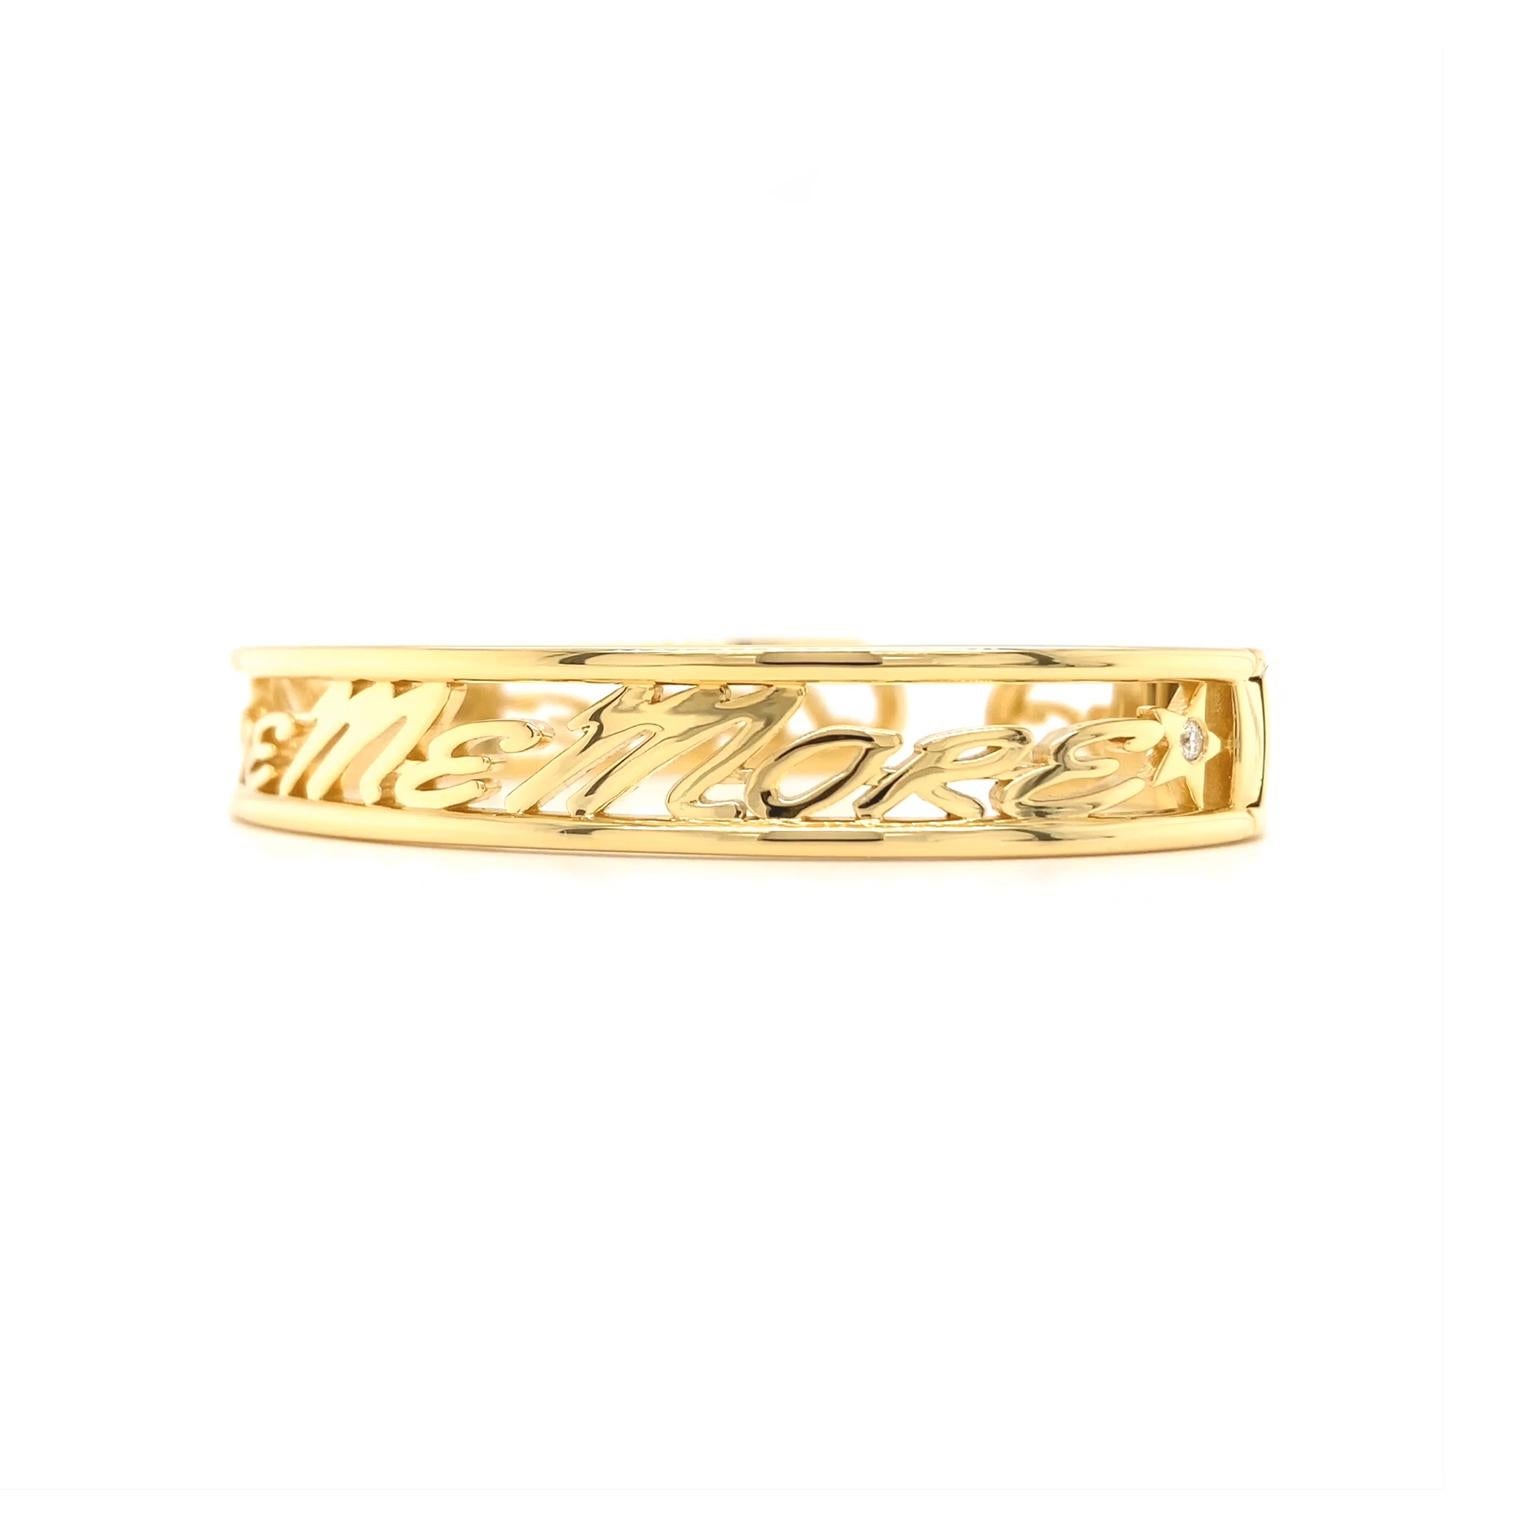 Love and stars embellish this bracelet. The body is 18k yellow gold, with smooth lines forming the edges. Inside, the phrase 'I love me more” serves as affirmation and adornment. Stars brightened with round brilliant cut diamonds punctuate the